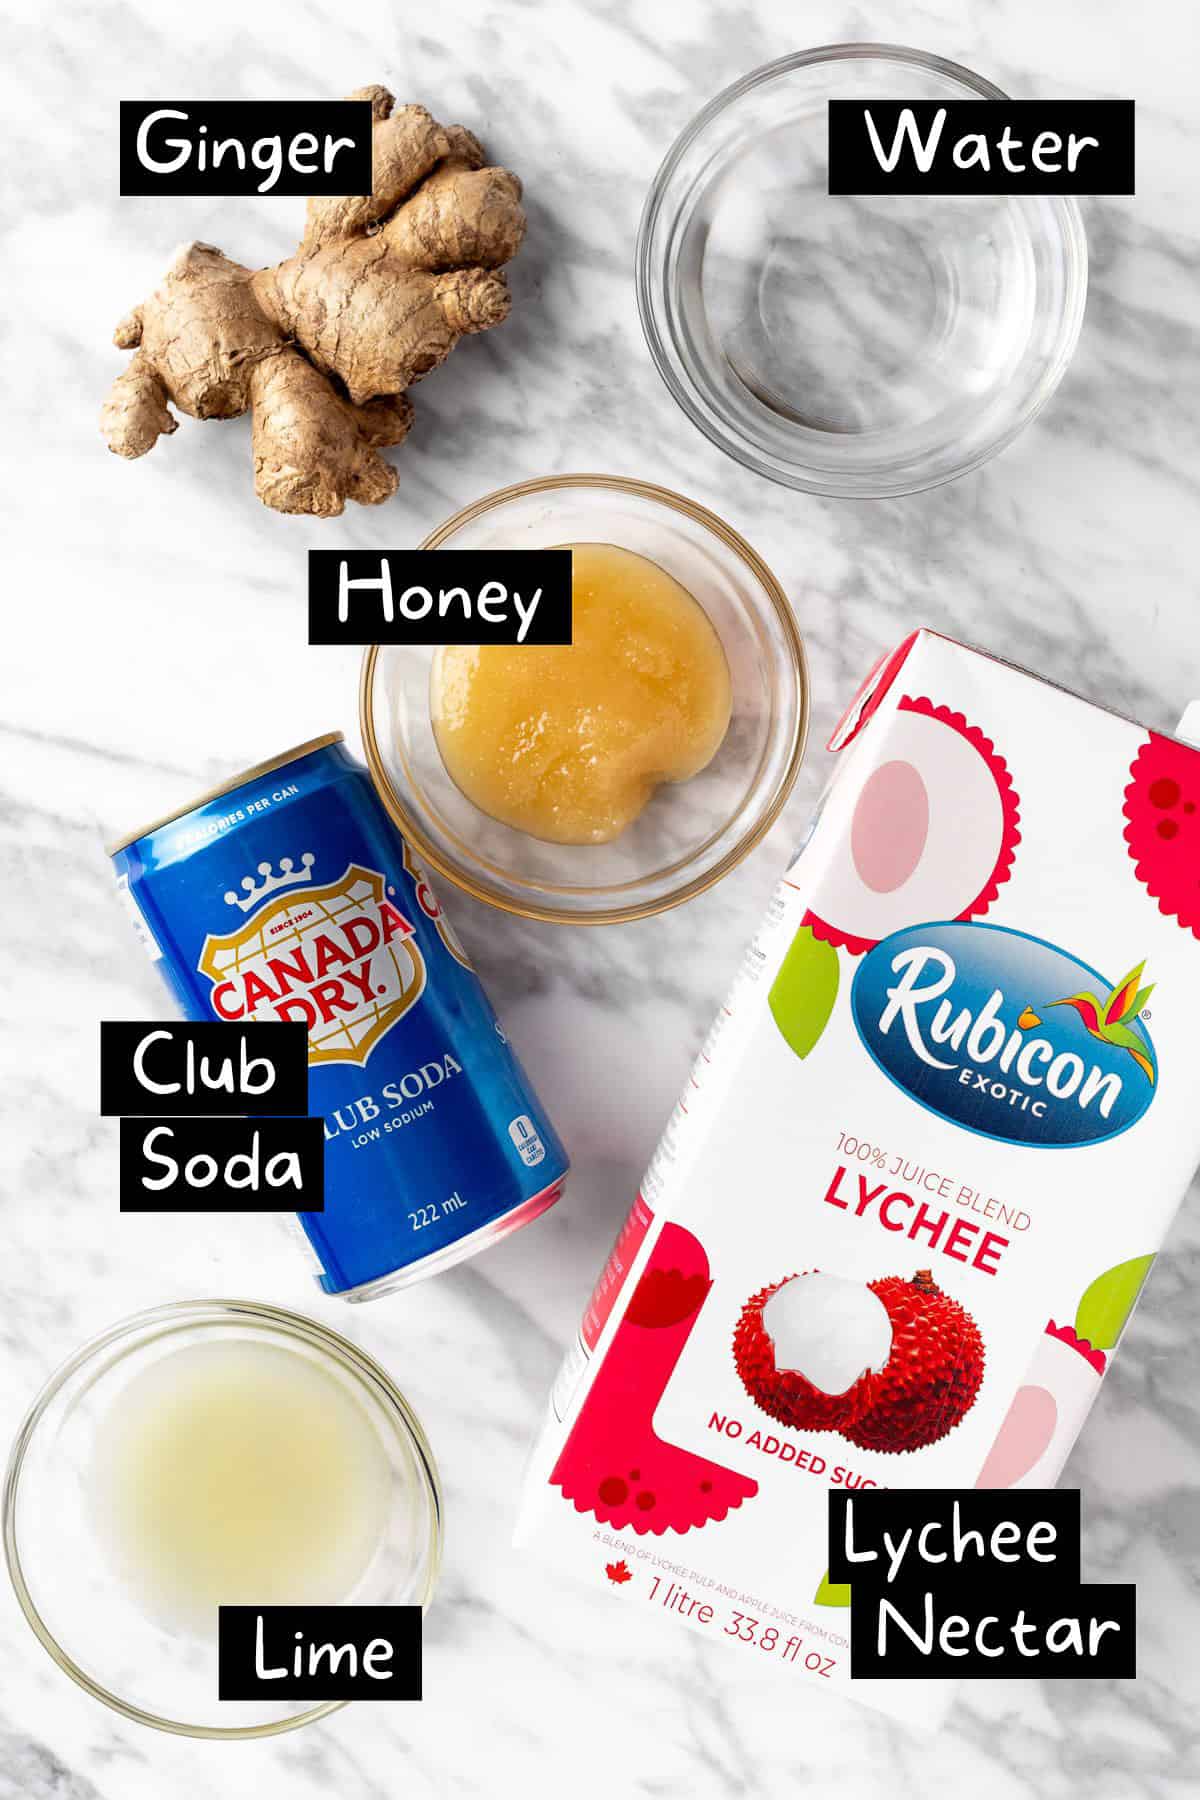 The ingredients needed to make the lychee mocktail.